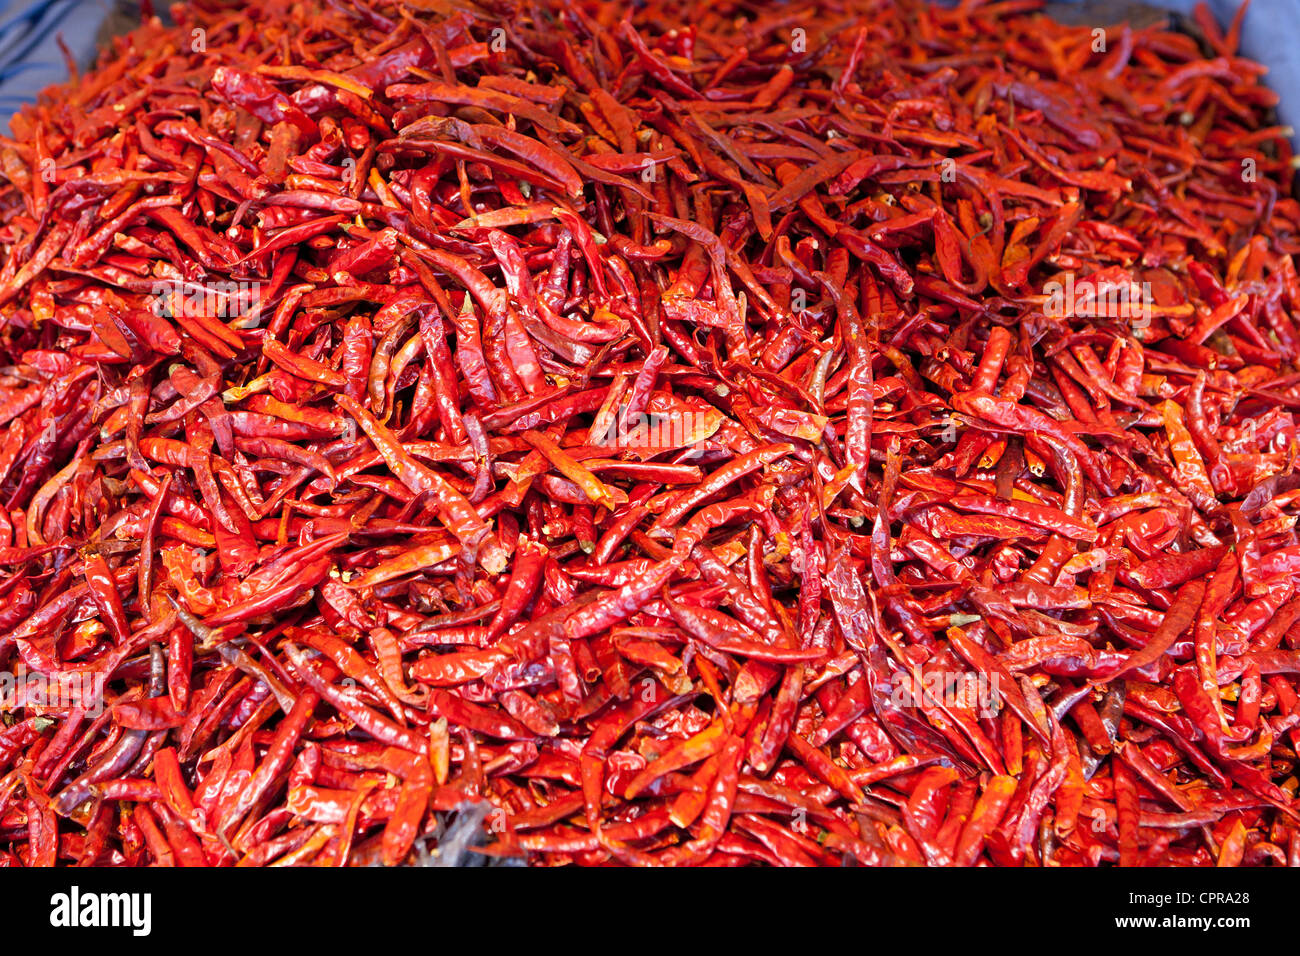 Pile of small red chili peppers Stock Photo